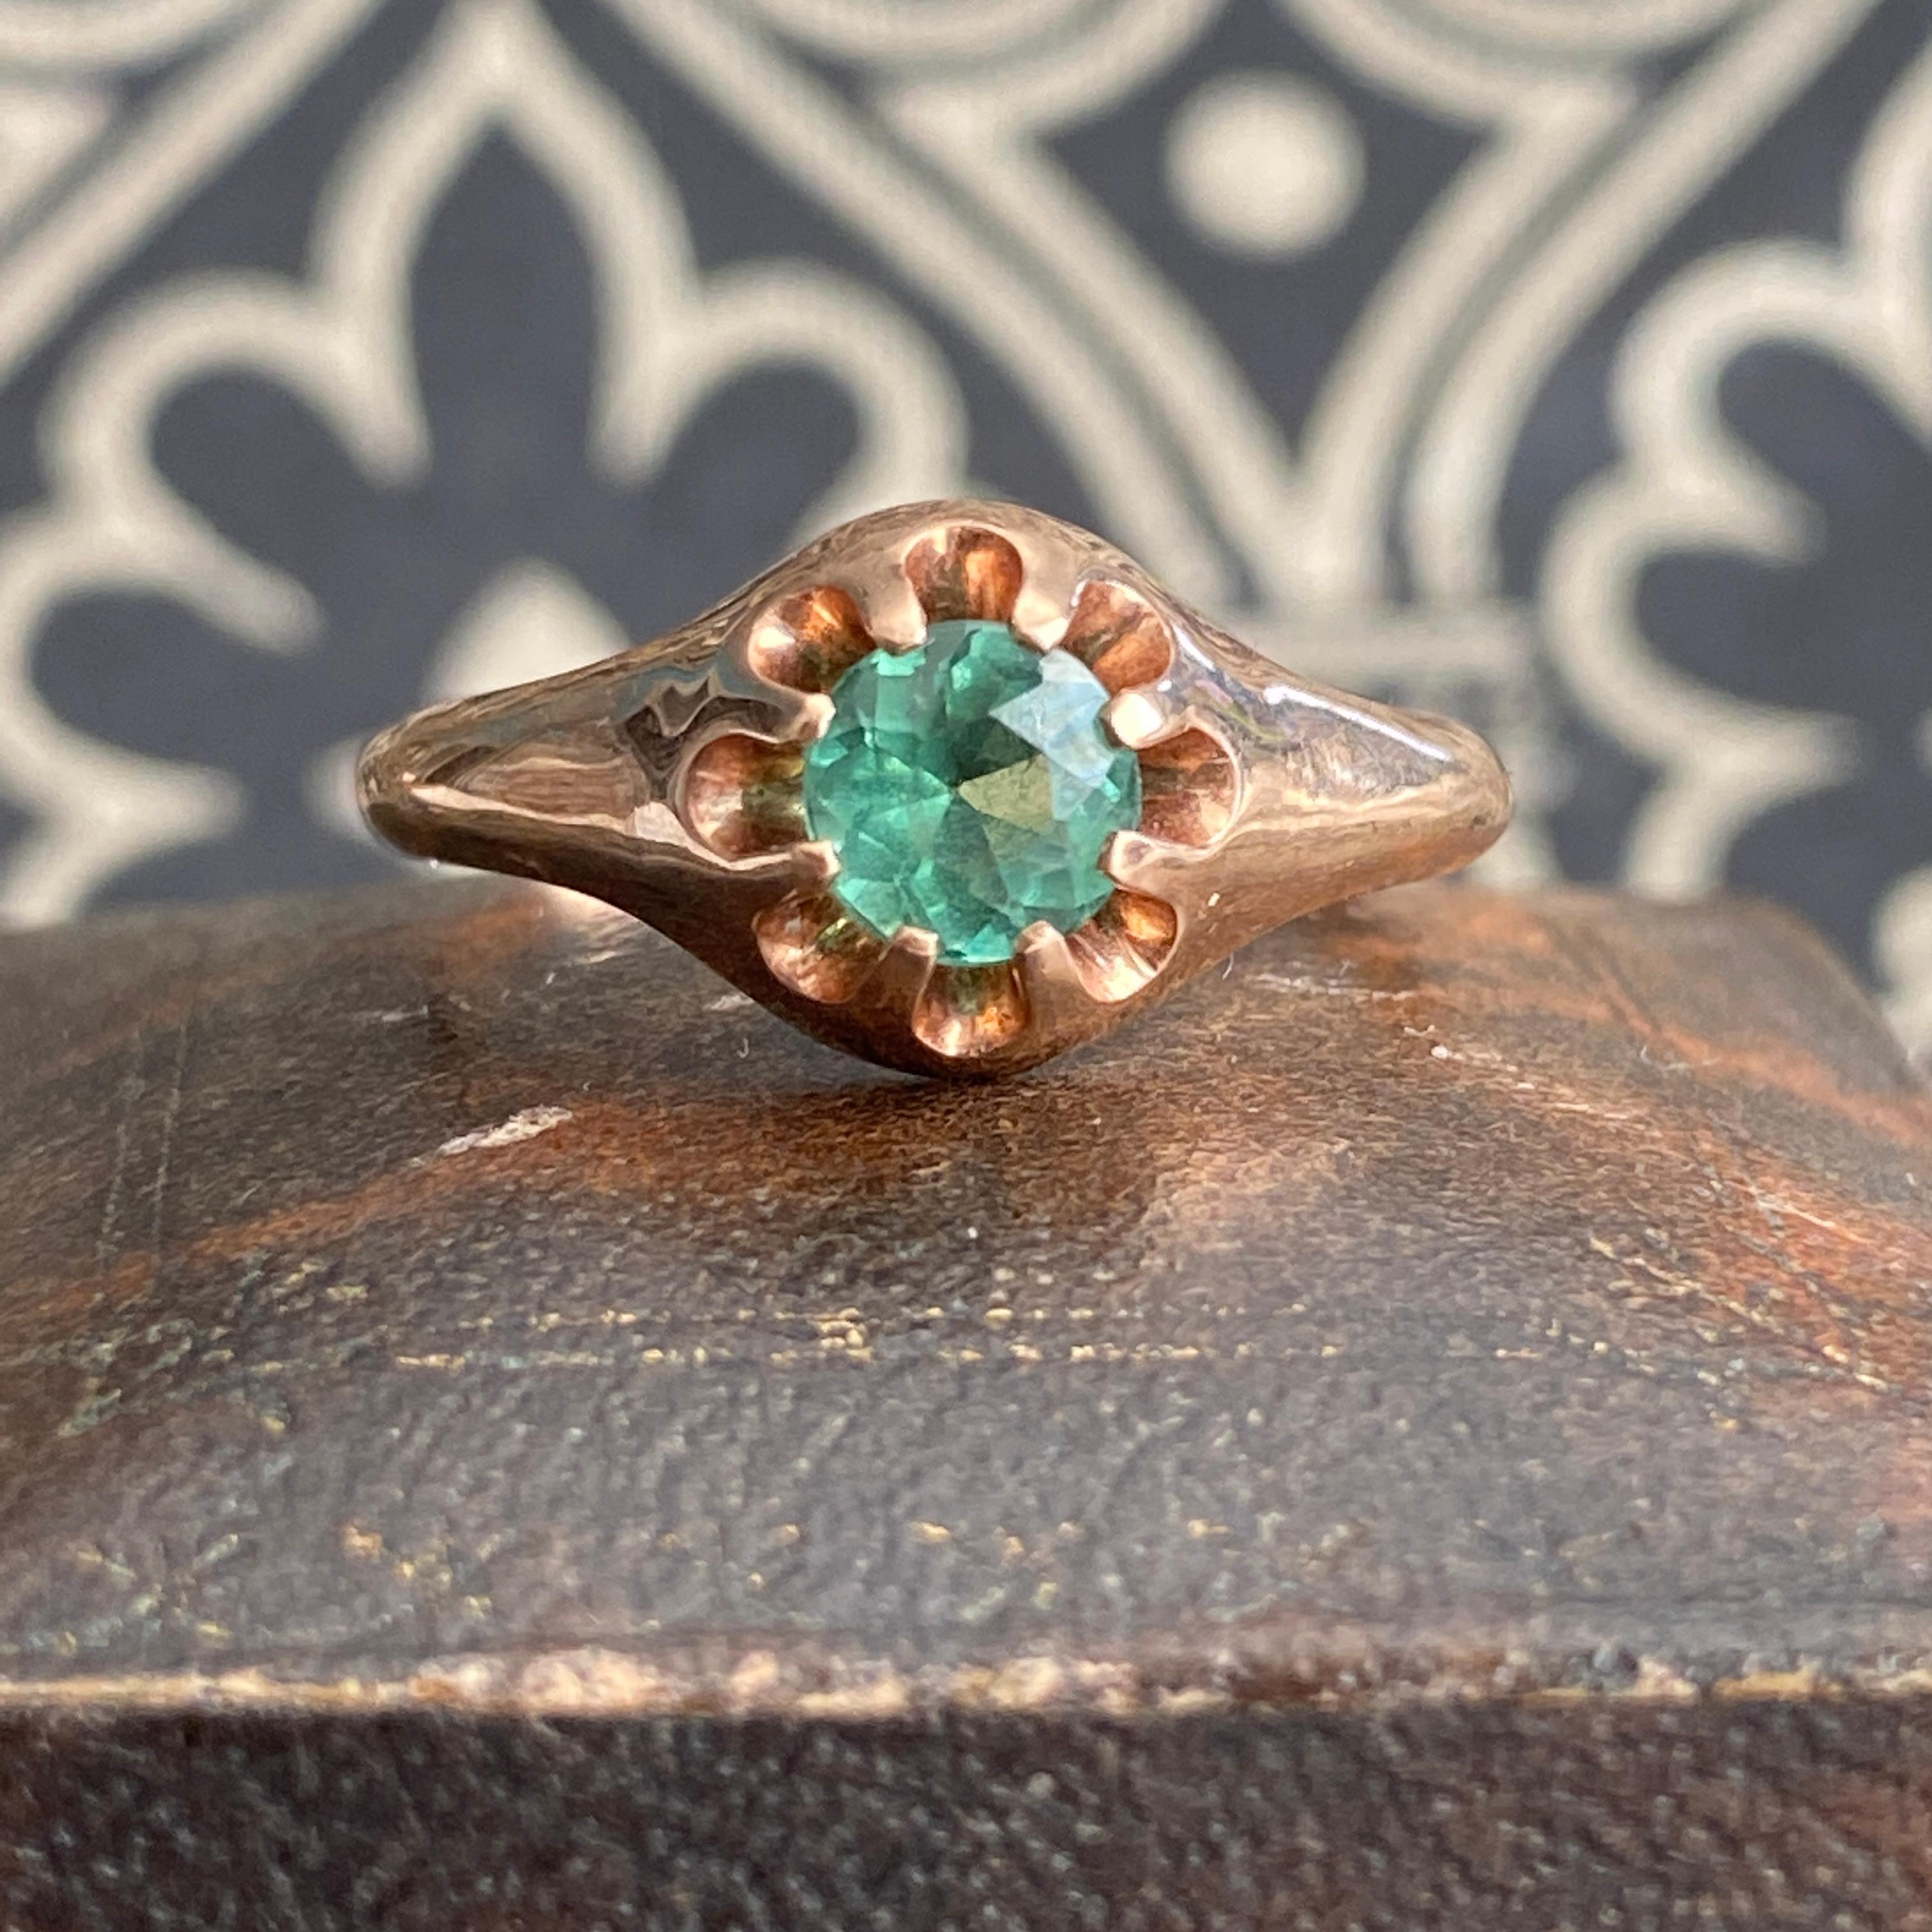 Details:
Very pretty vintage rose gold solitaire ring with a bright blue green tourmaline. Simple 14K rose gold with a raised prong set stone, this ring has a very classic sweet look! The green in the stone is green with a subtle blue cast—think of